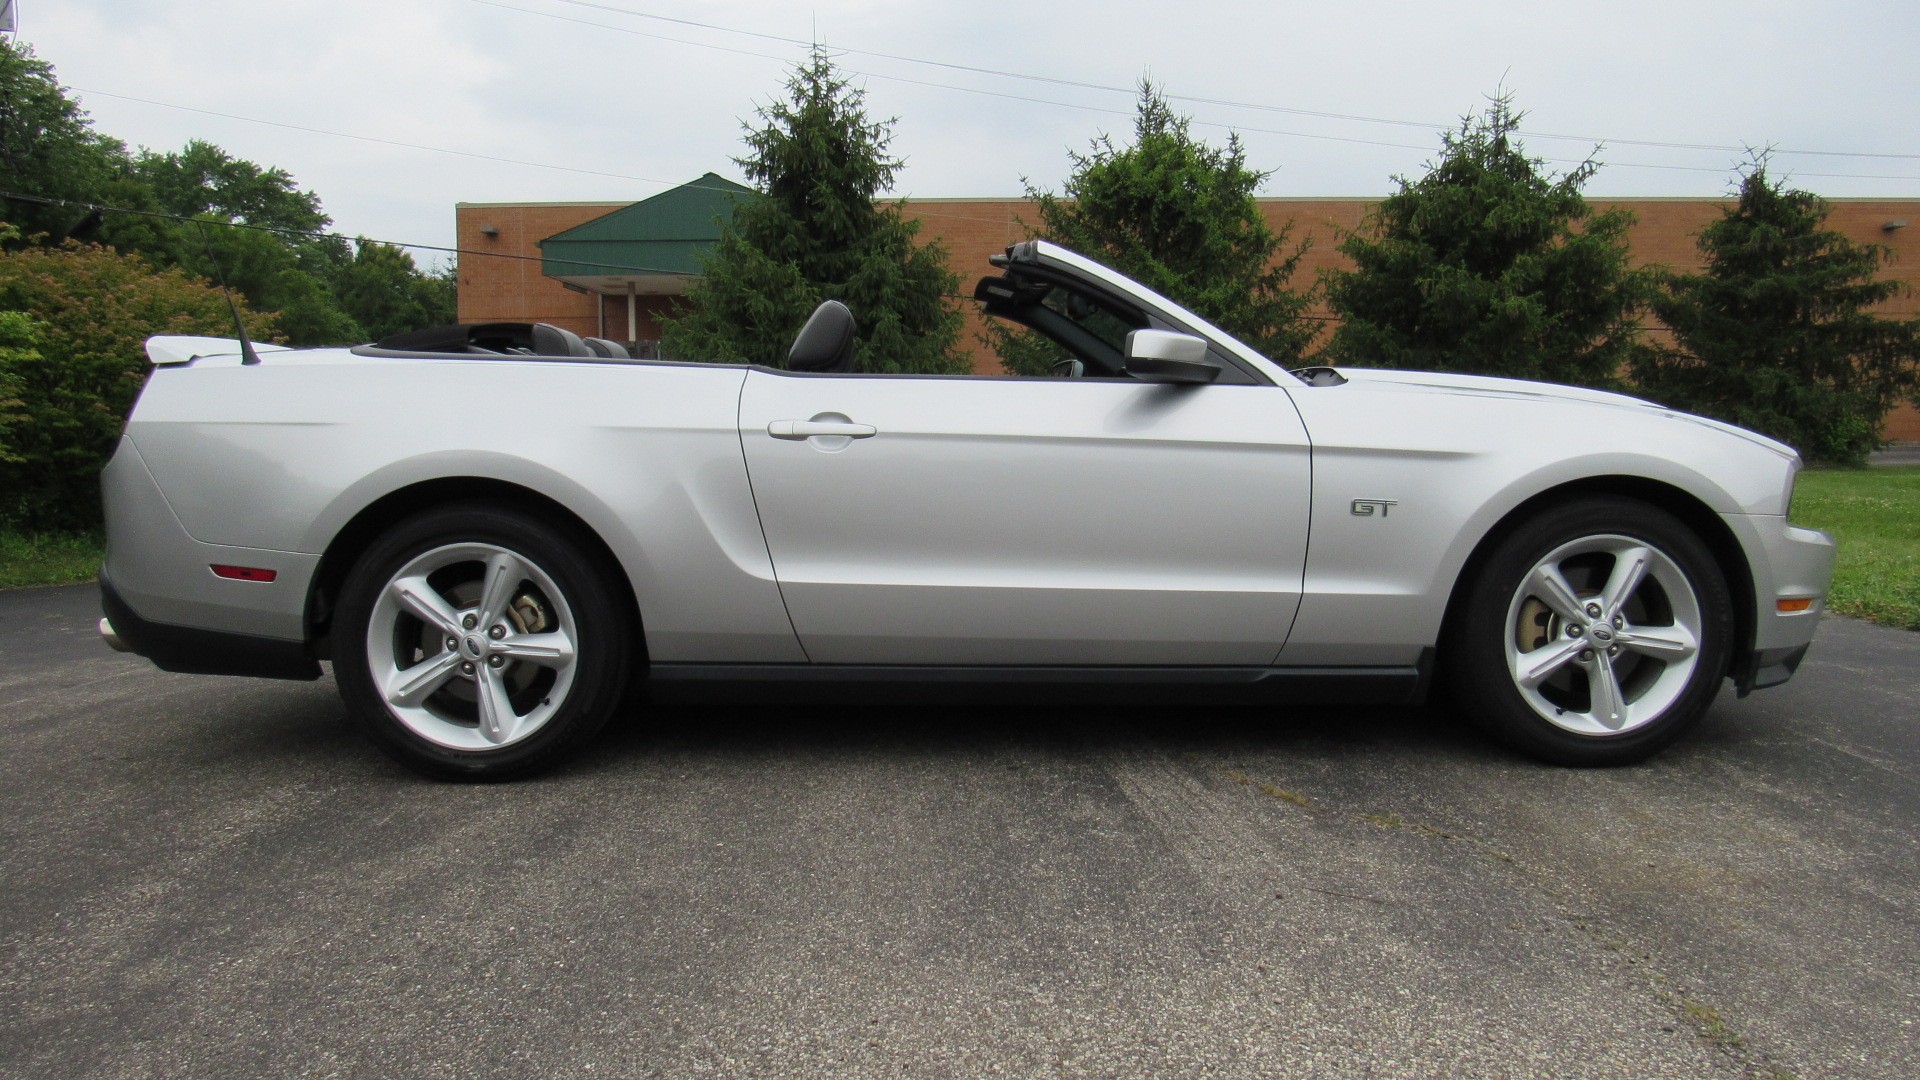 2010 Mustang GT Convertible, 1 Owner, 37K Miles, 5 Speed, Sold!